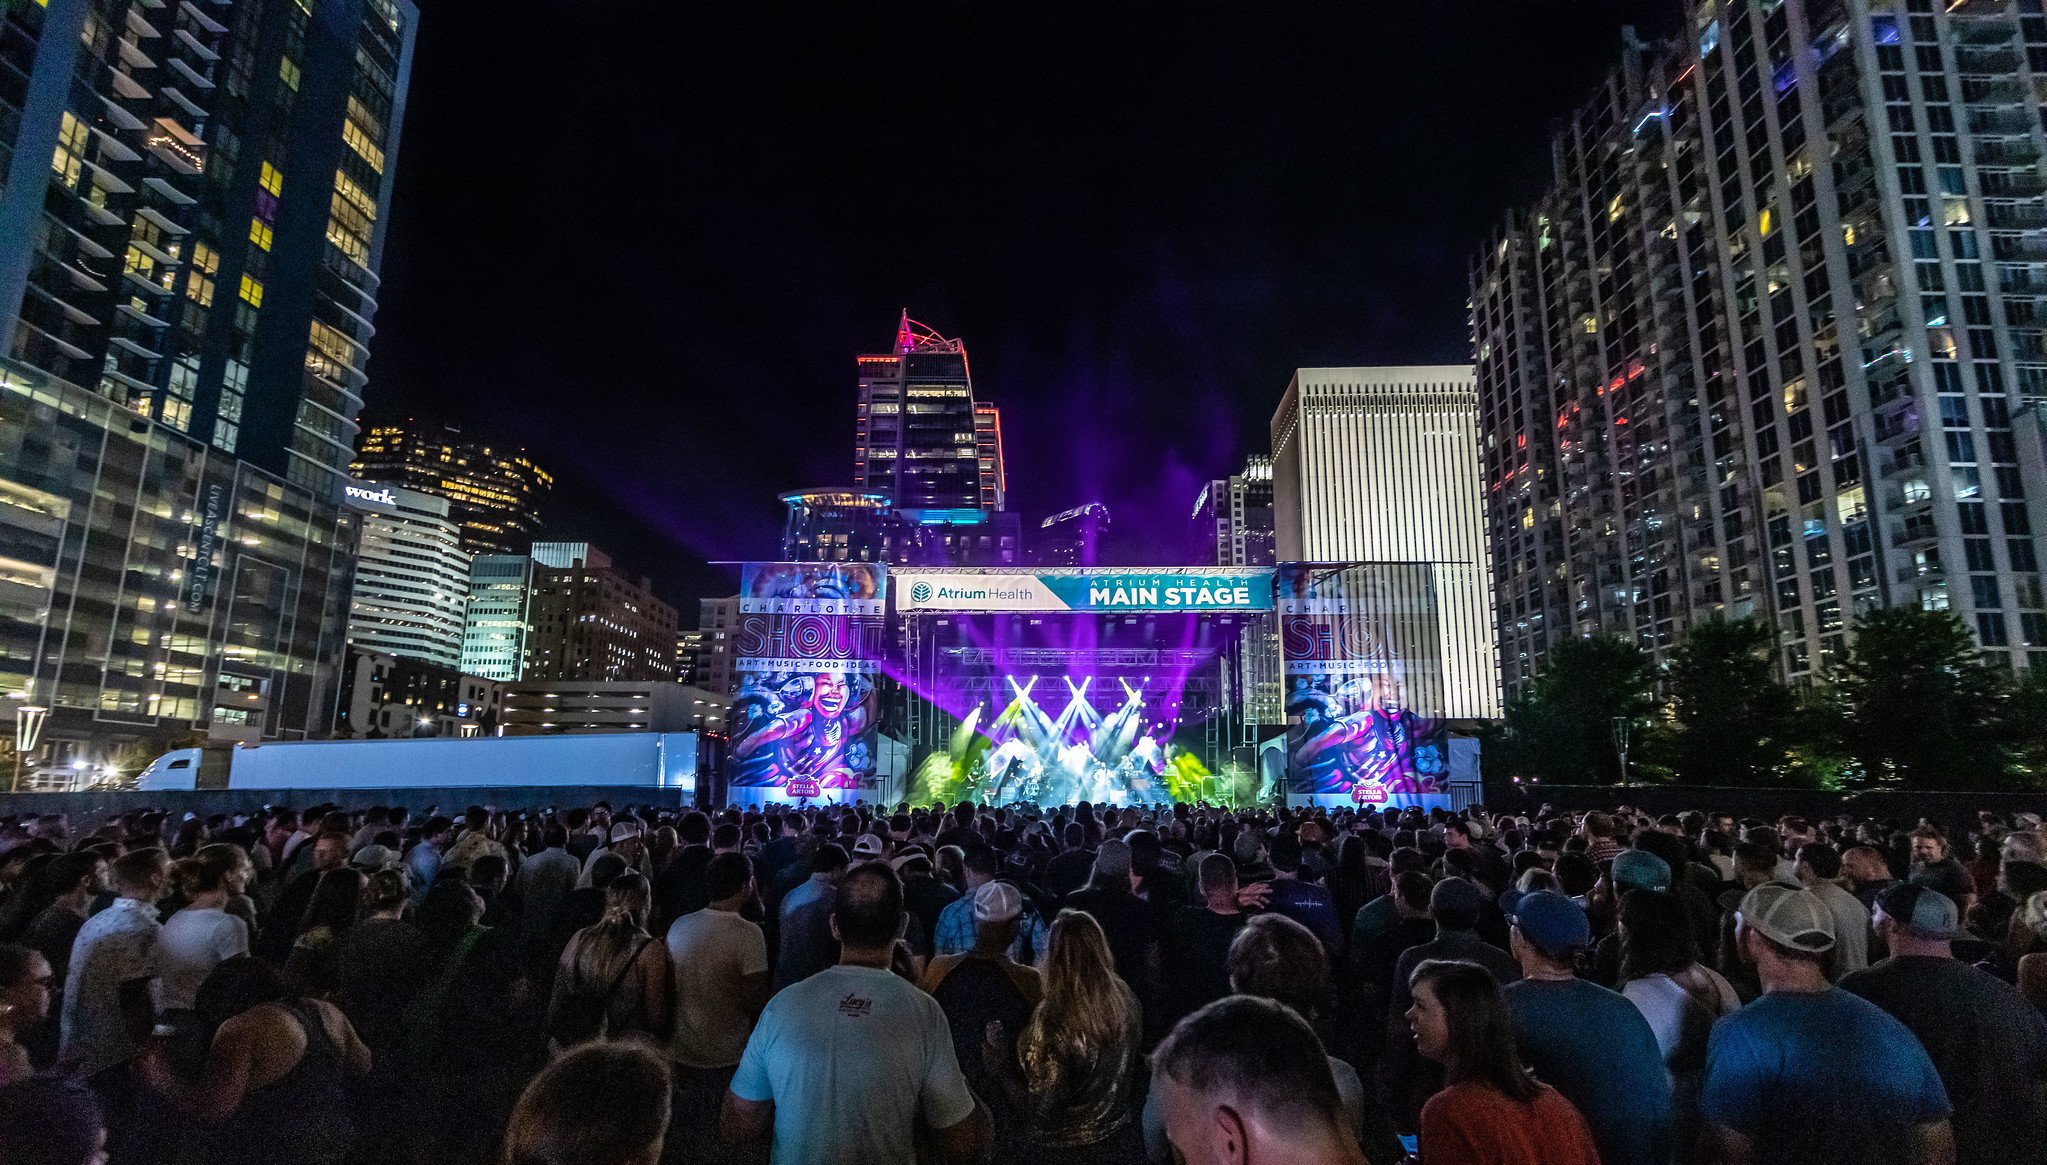 Charlotte SHOUT! Festival Returns to Uptown in Fall 2021